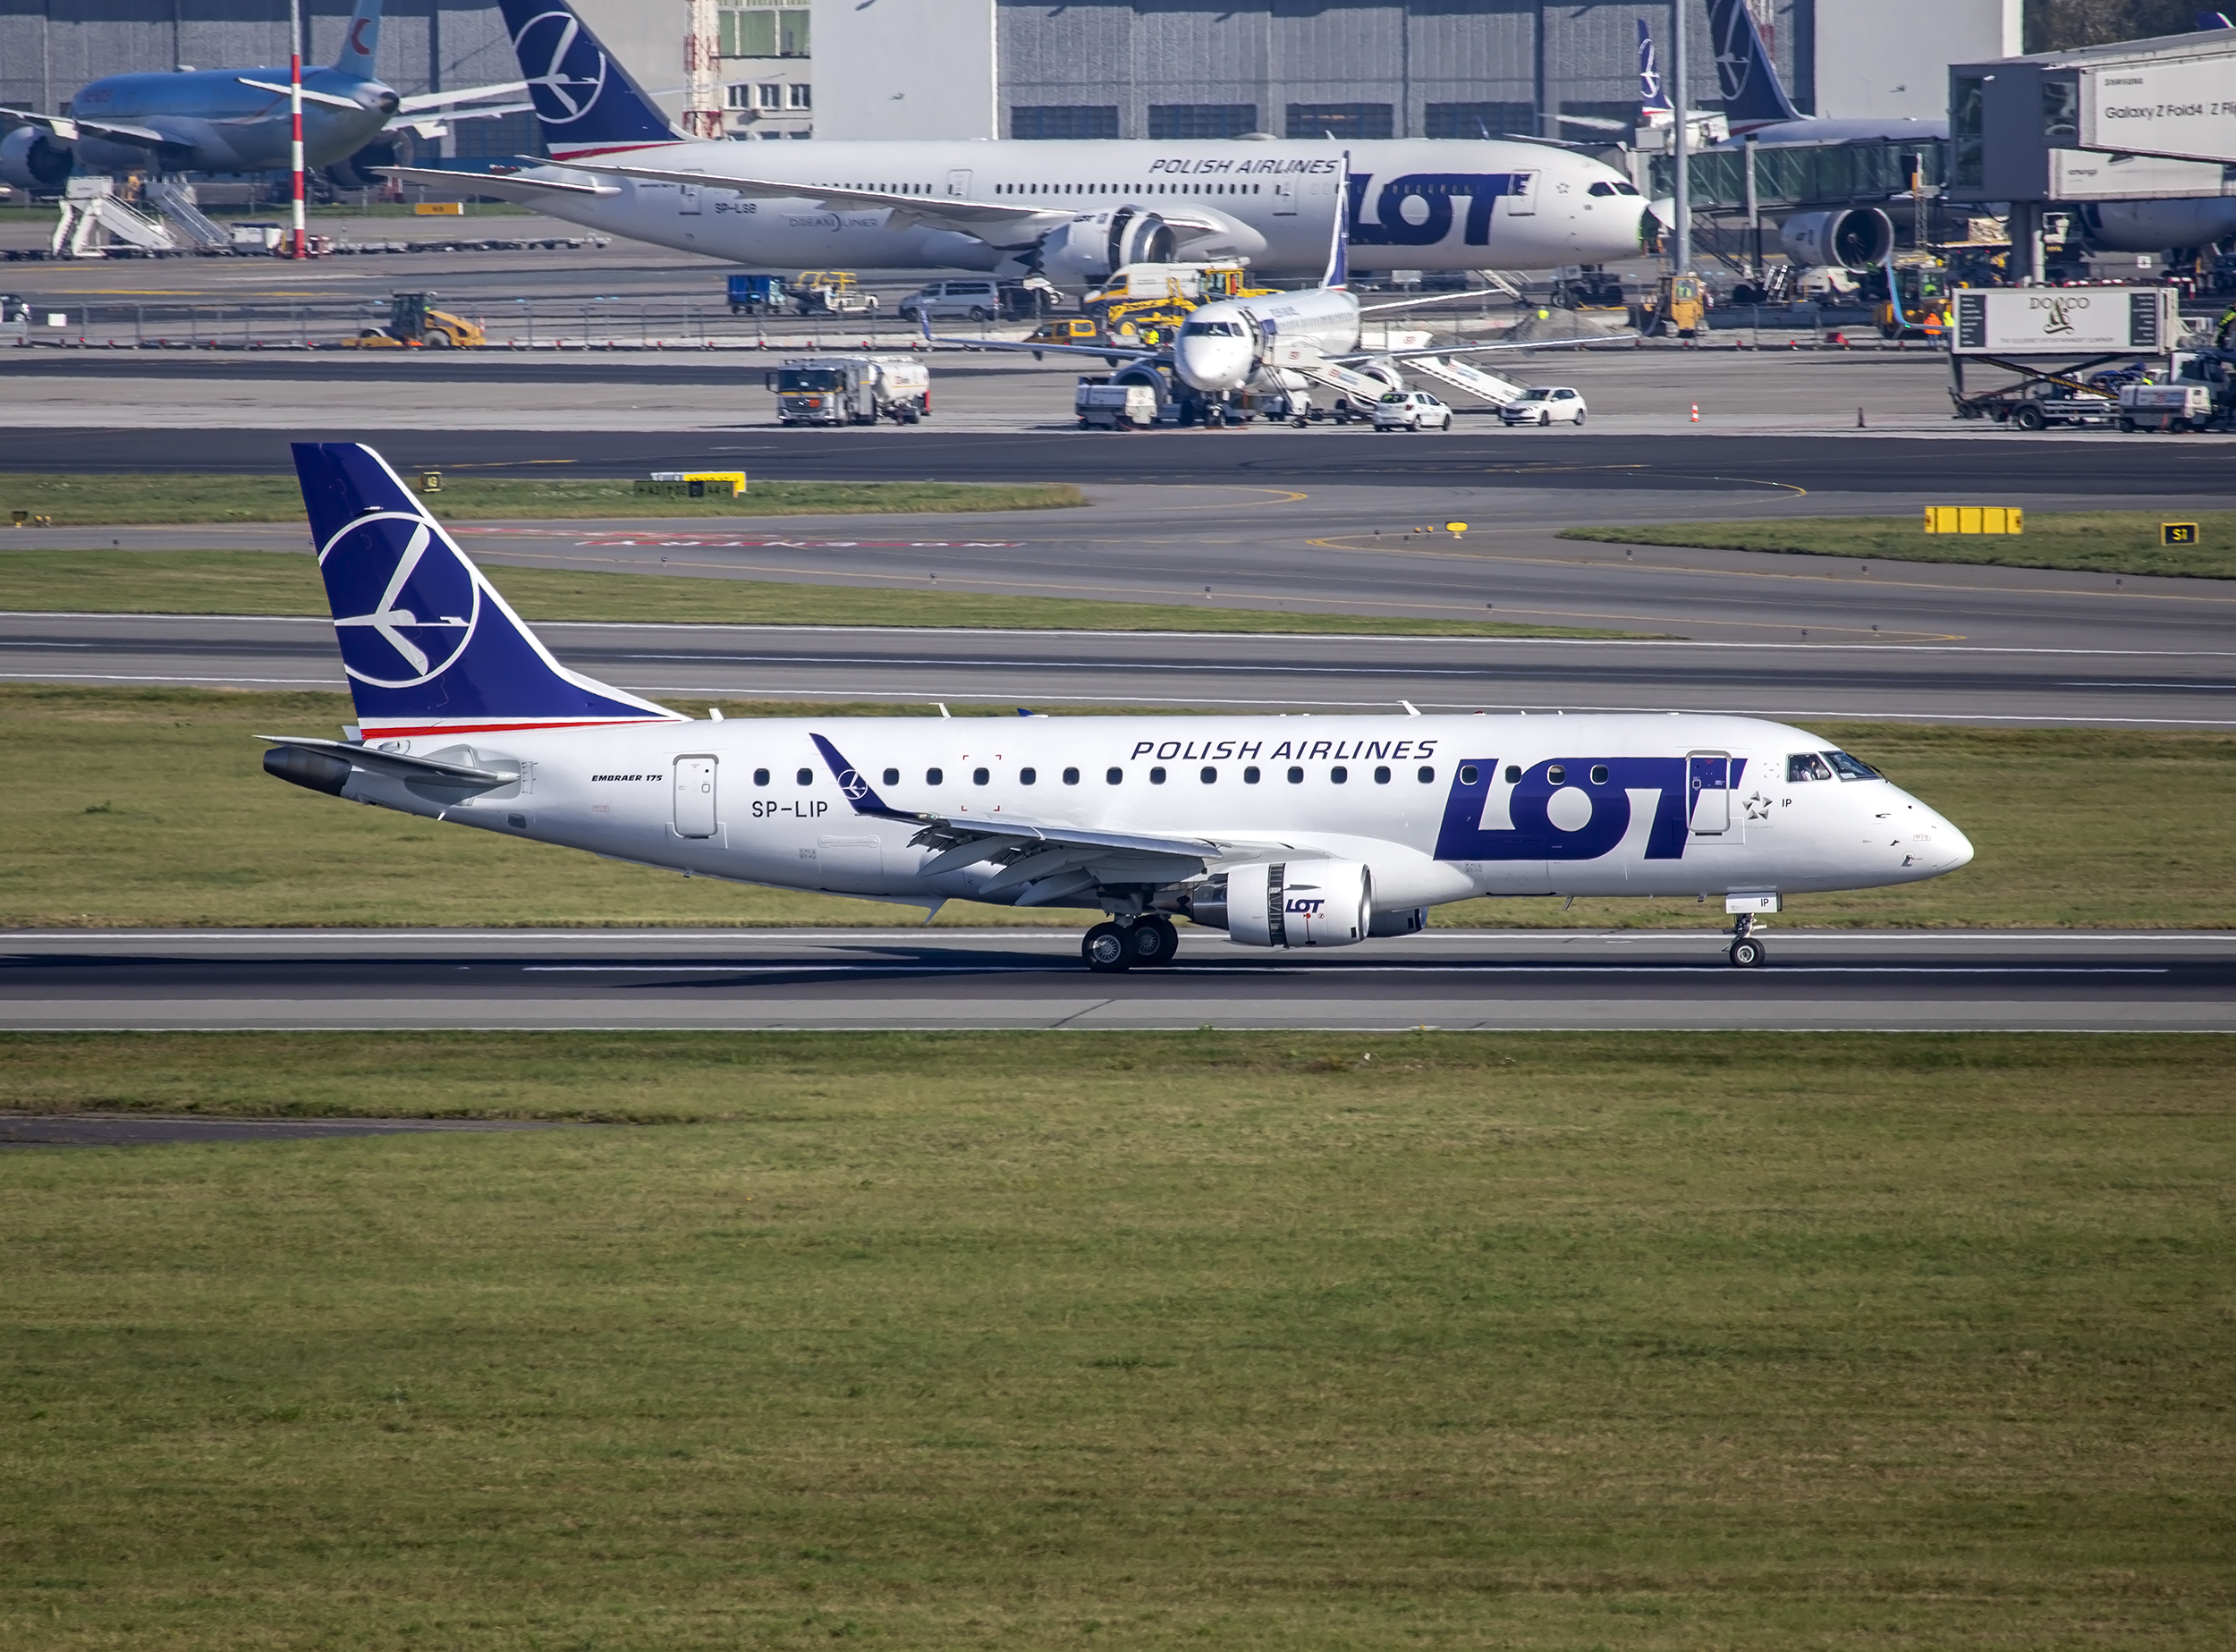 A new LOT Polish Airlines Embraer E175 touches down in Warsaw.